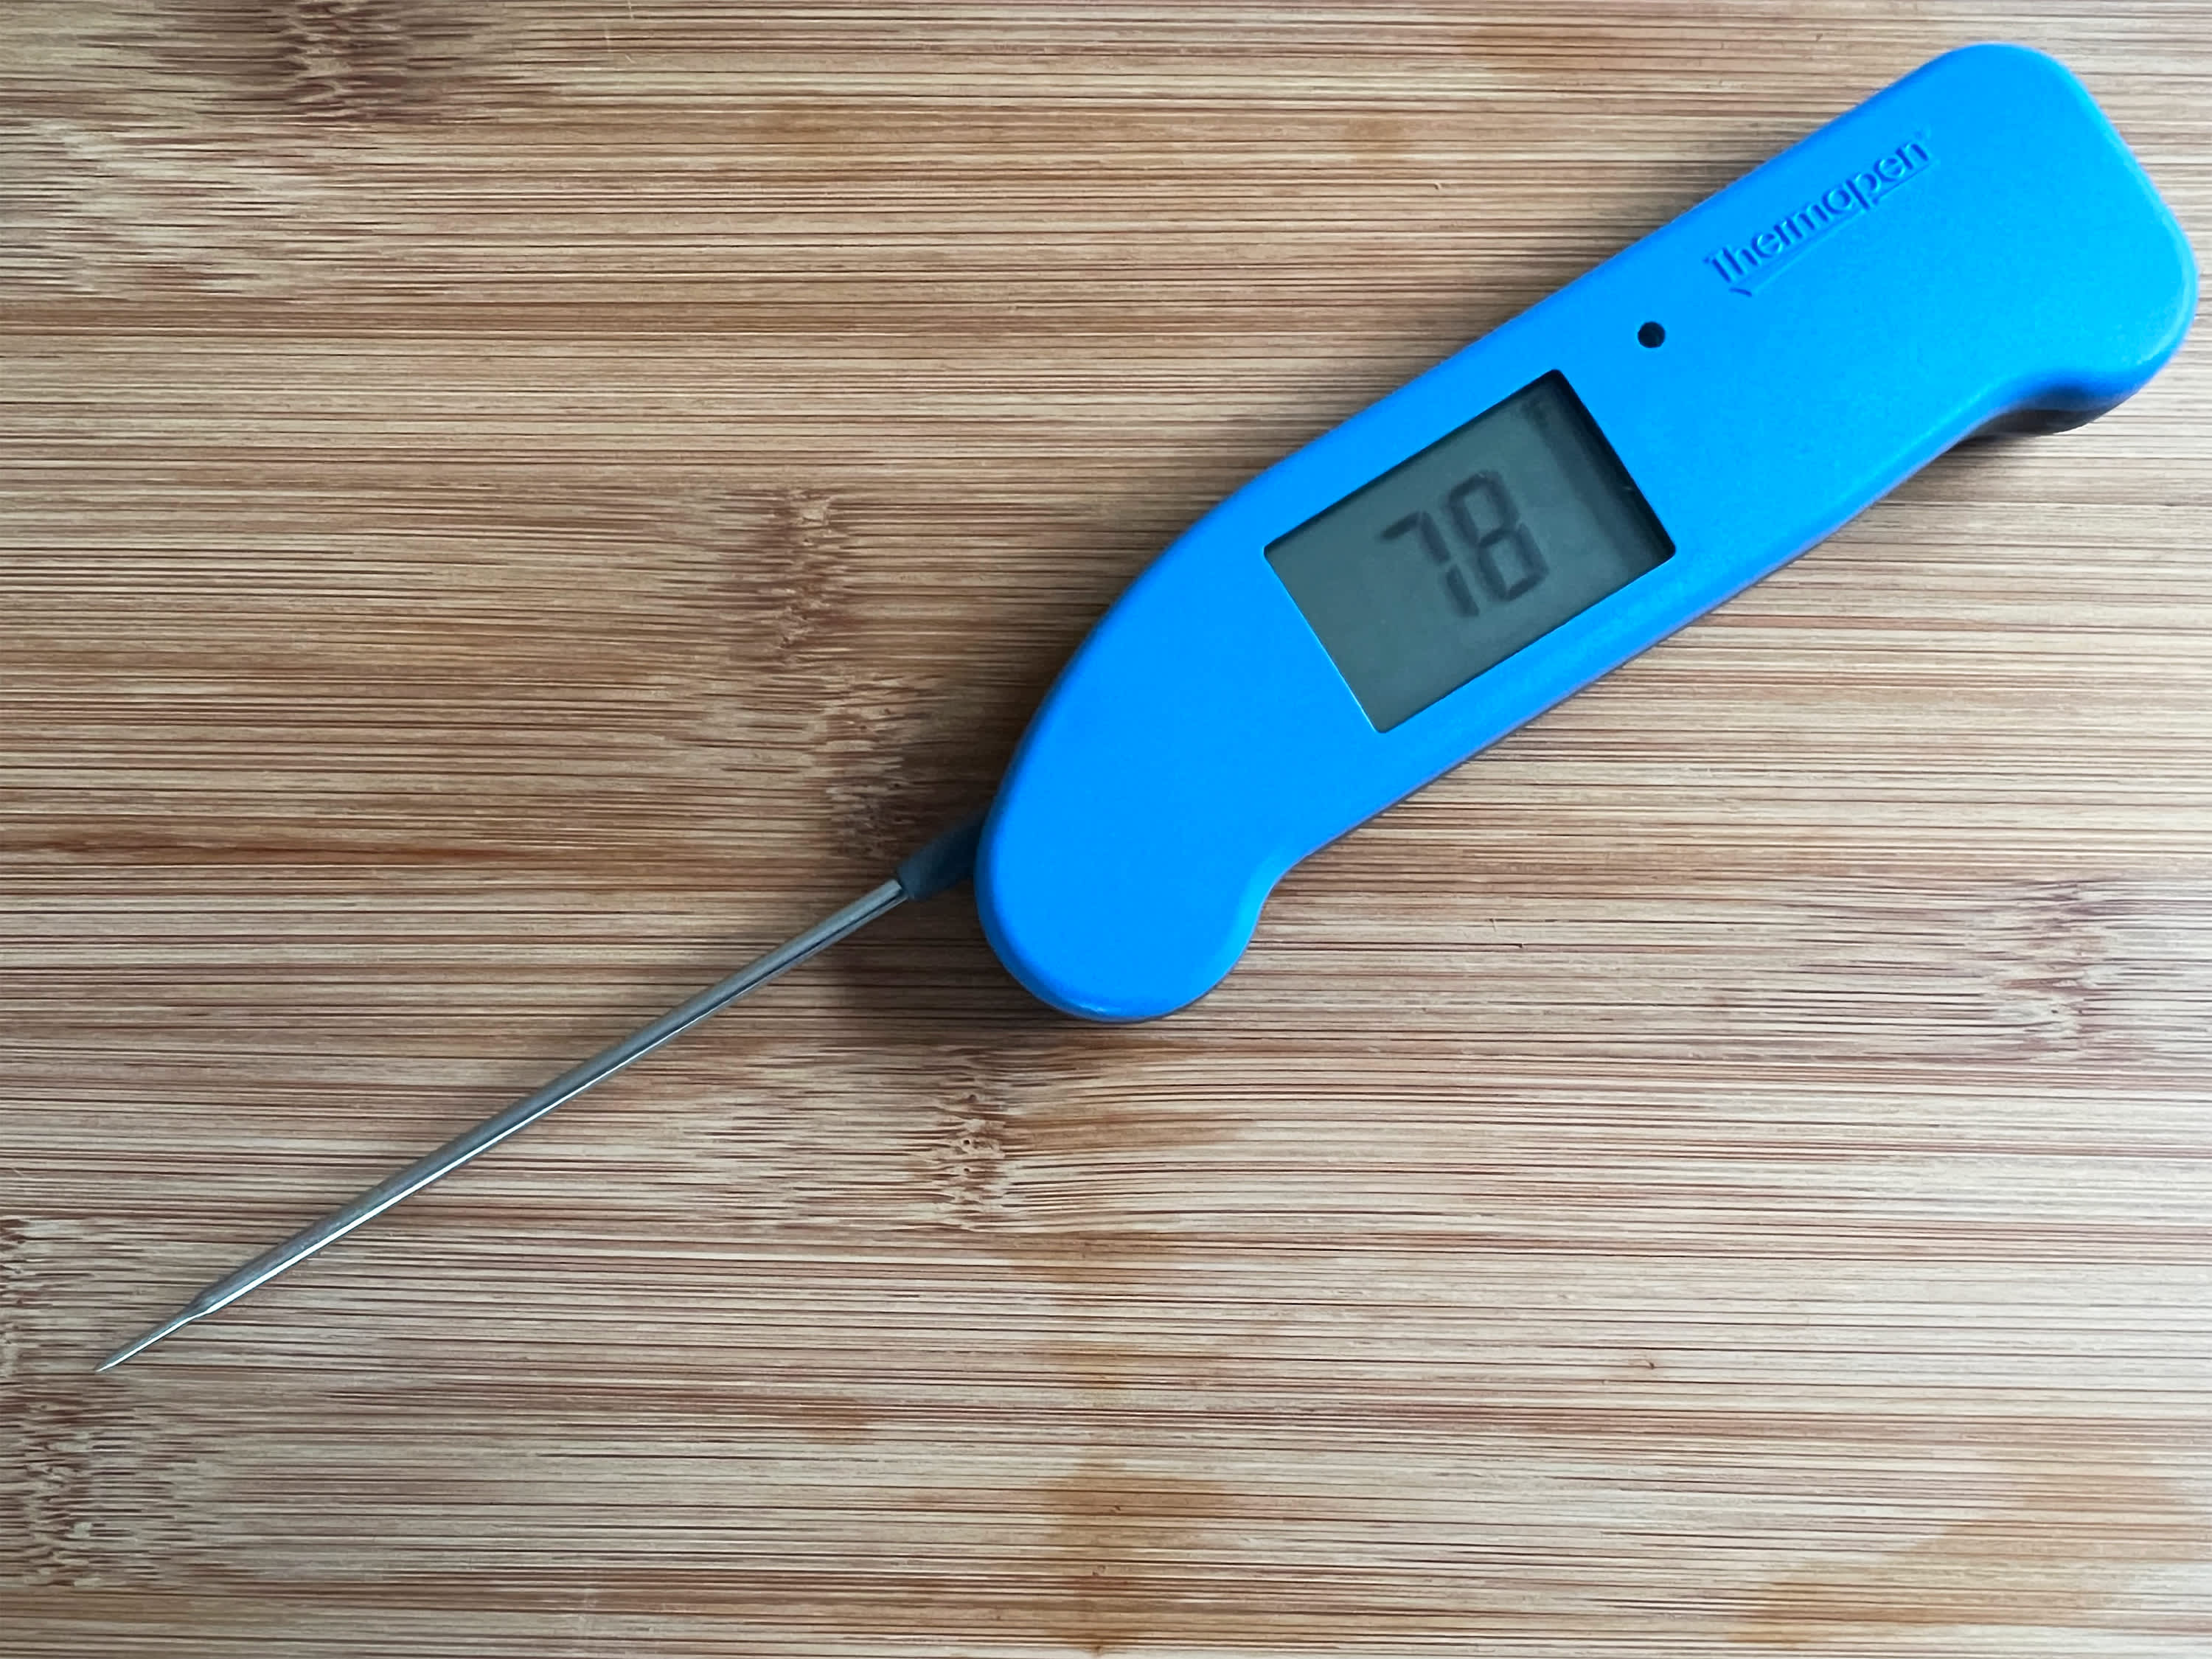 ThermoWorks Thermapen ONE Review - Grill Reviews - Grillseeker